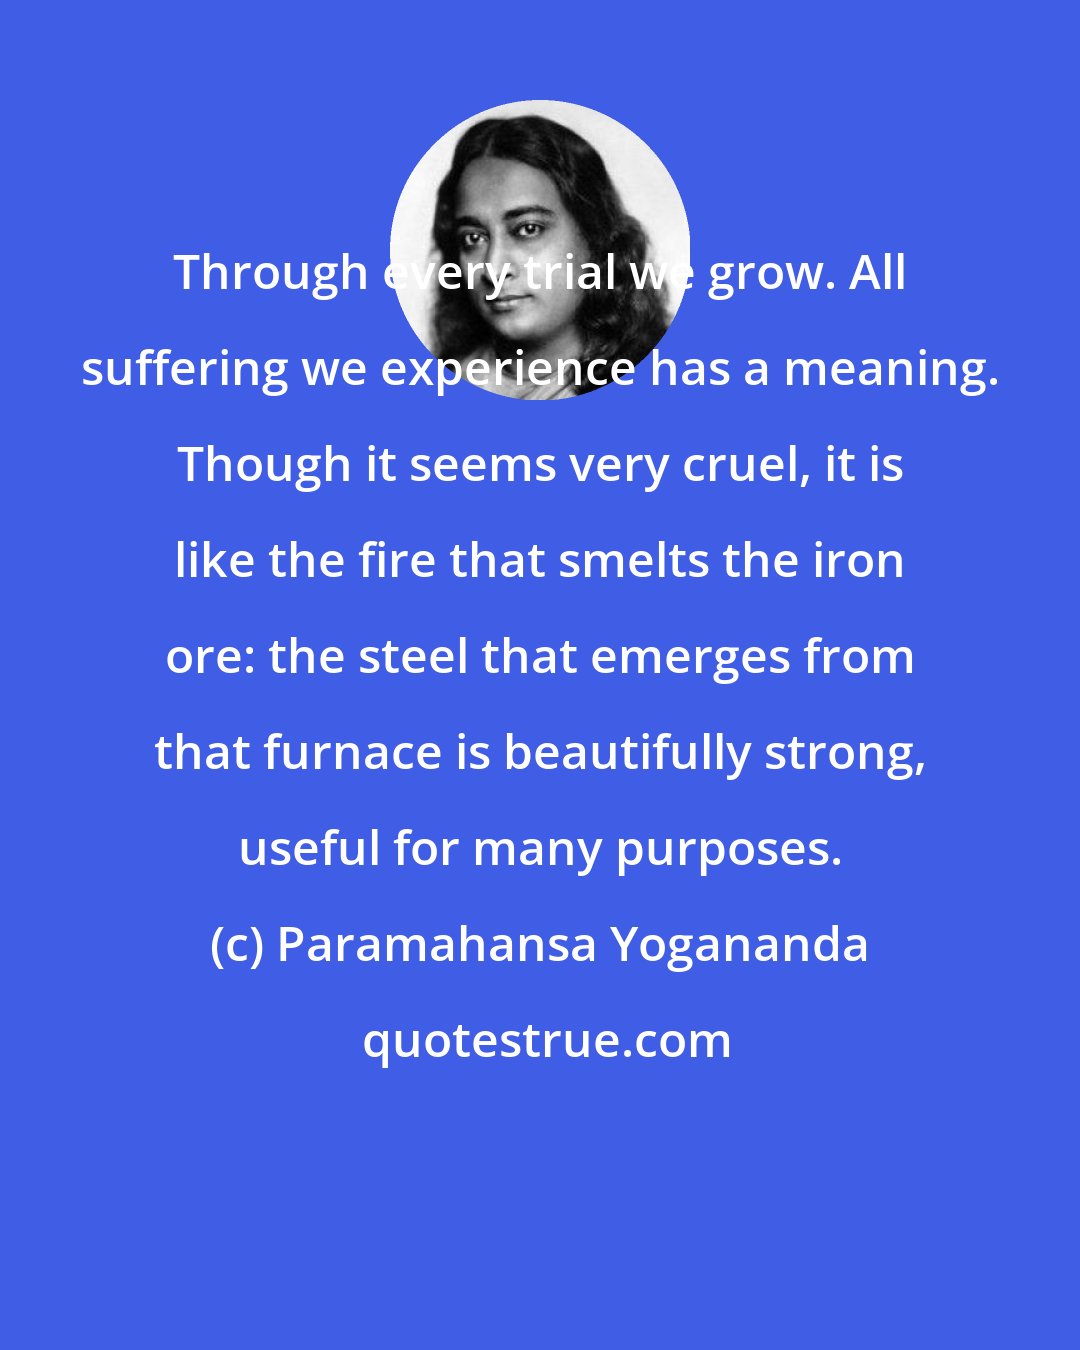 Paramahansa Yogananda: Through every trial we grow. All suffering we experience has a meaning. Though it seems very cruel, it is like the fire that smelts the iron ore: the steel that emerges from that furnace is beautifully strong, useful for many purposes.